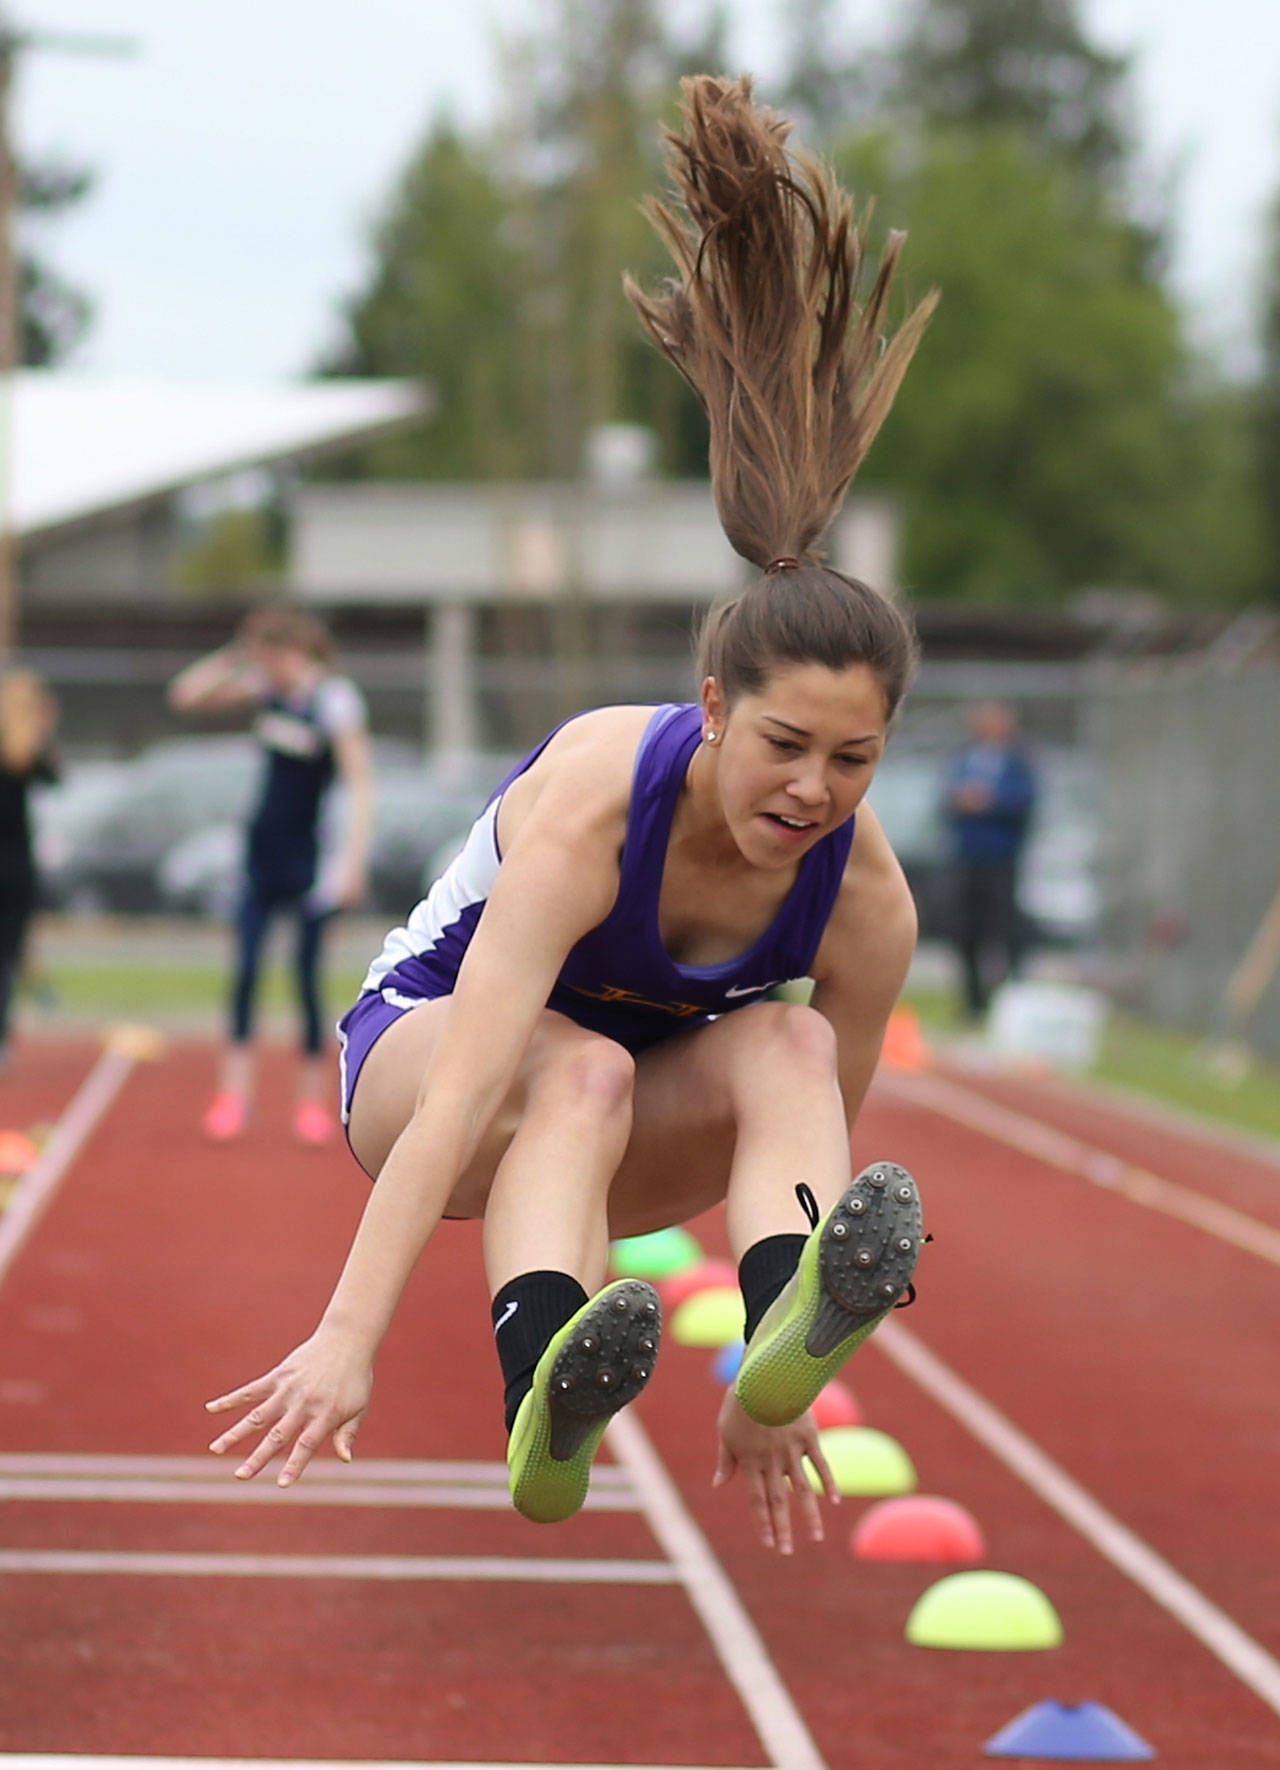 Jenna Cooley returns this season to lead the Wildcat girls track team. (Photo by John Fisken)